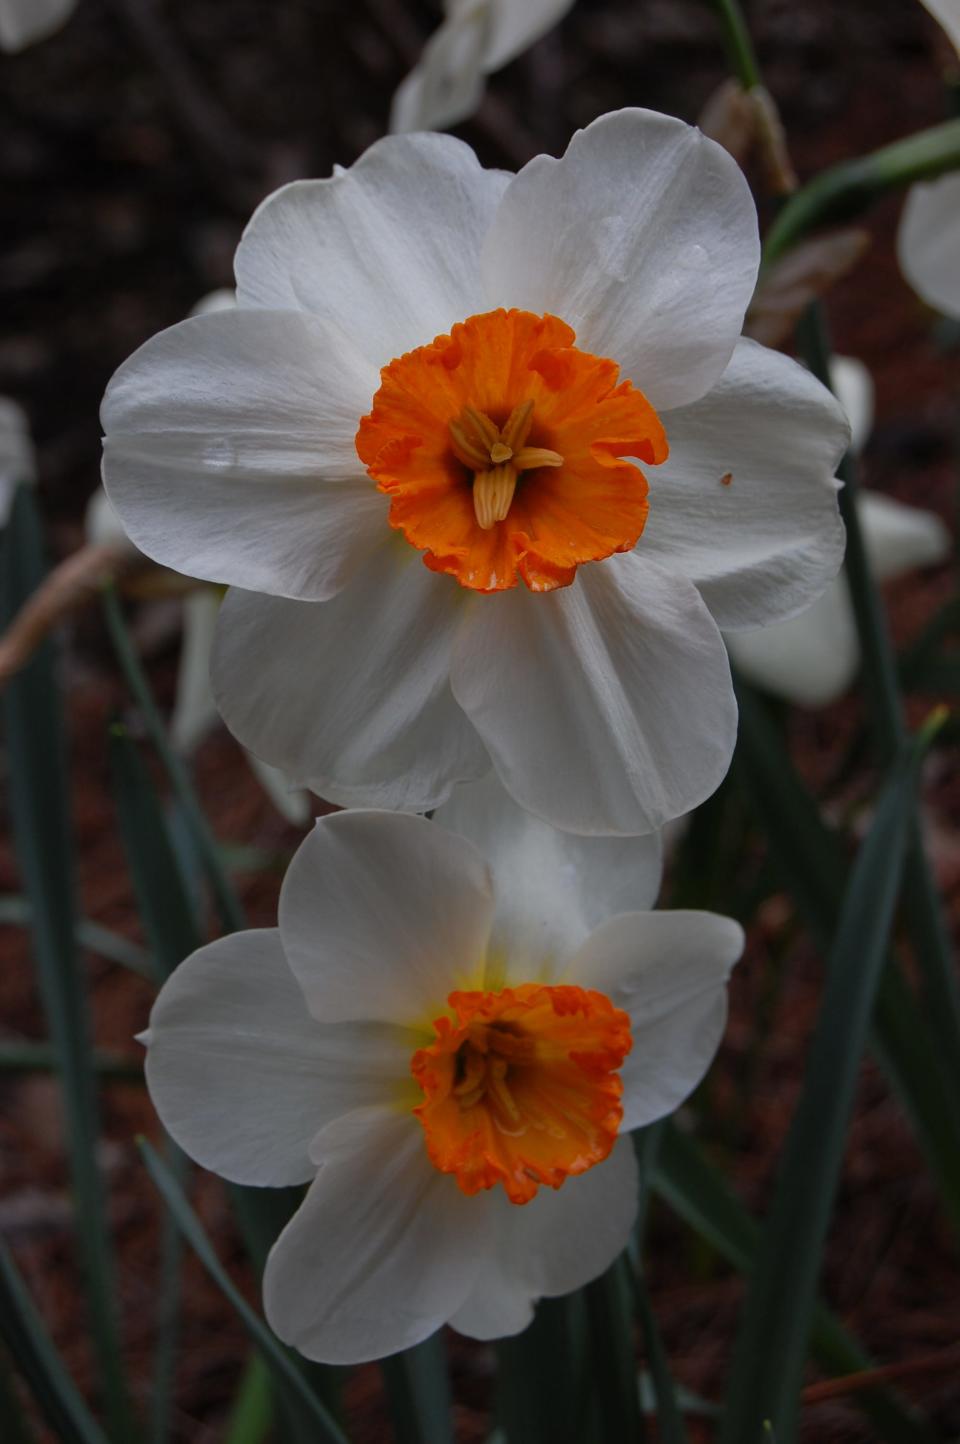 There is way more to daffodils than the traditional, all yellow form. Rarely bothered by deer, squirrels and chipmunks, they come in a wide range of colors and styles.